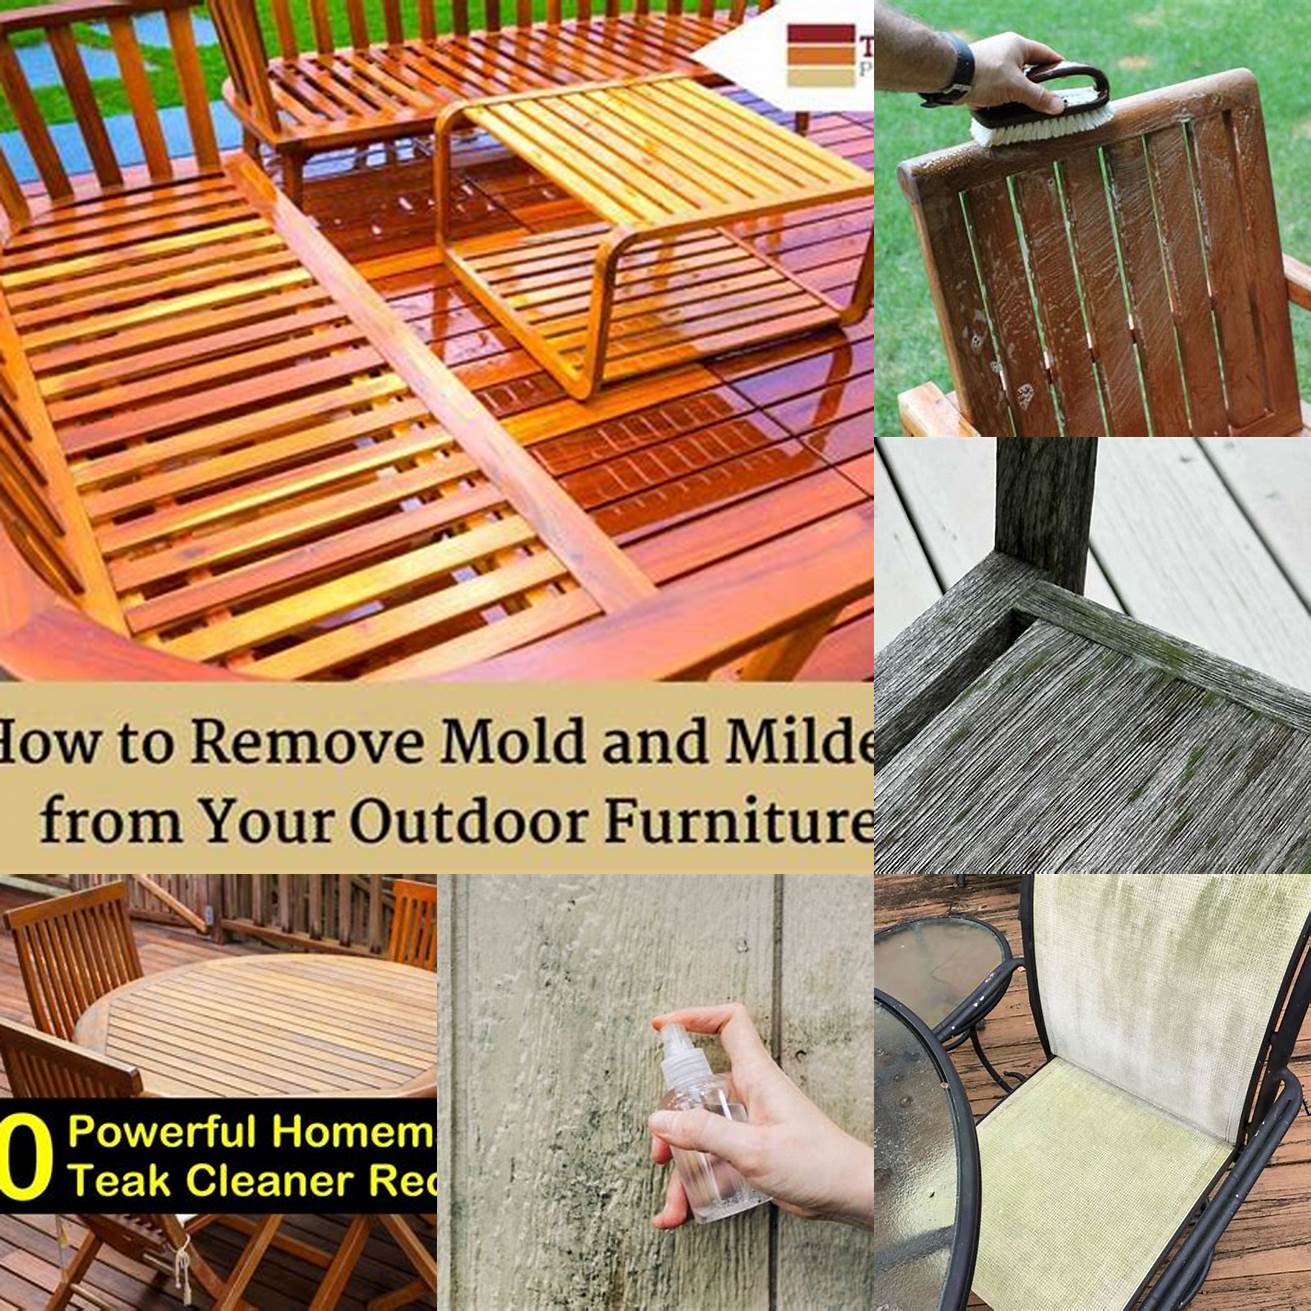 Cleaning Mold and Mildew From Teak Furniture